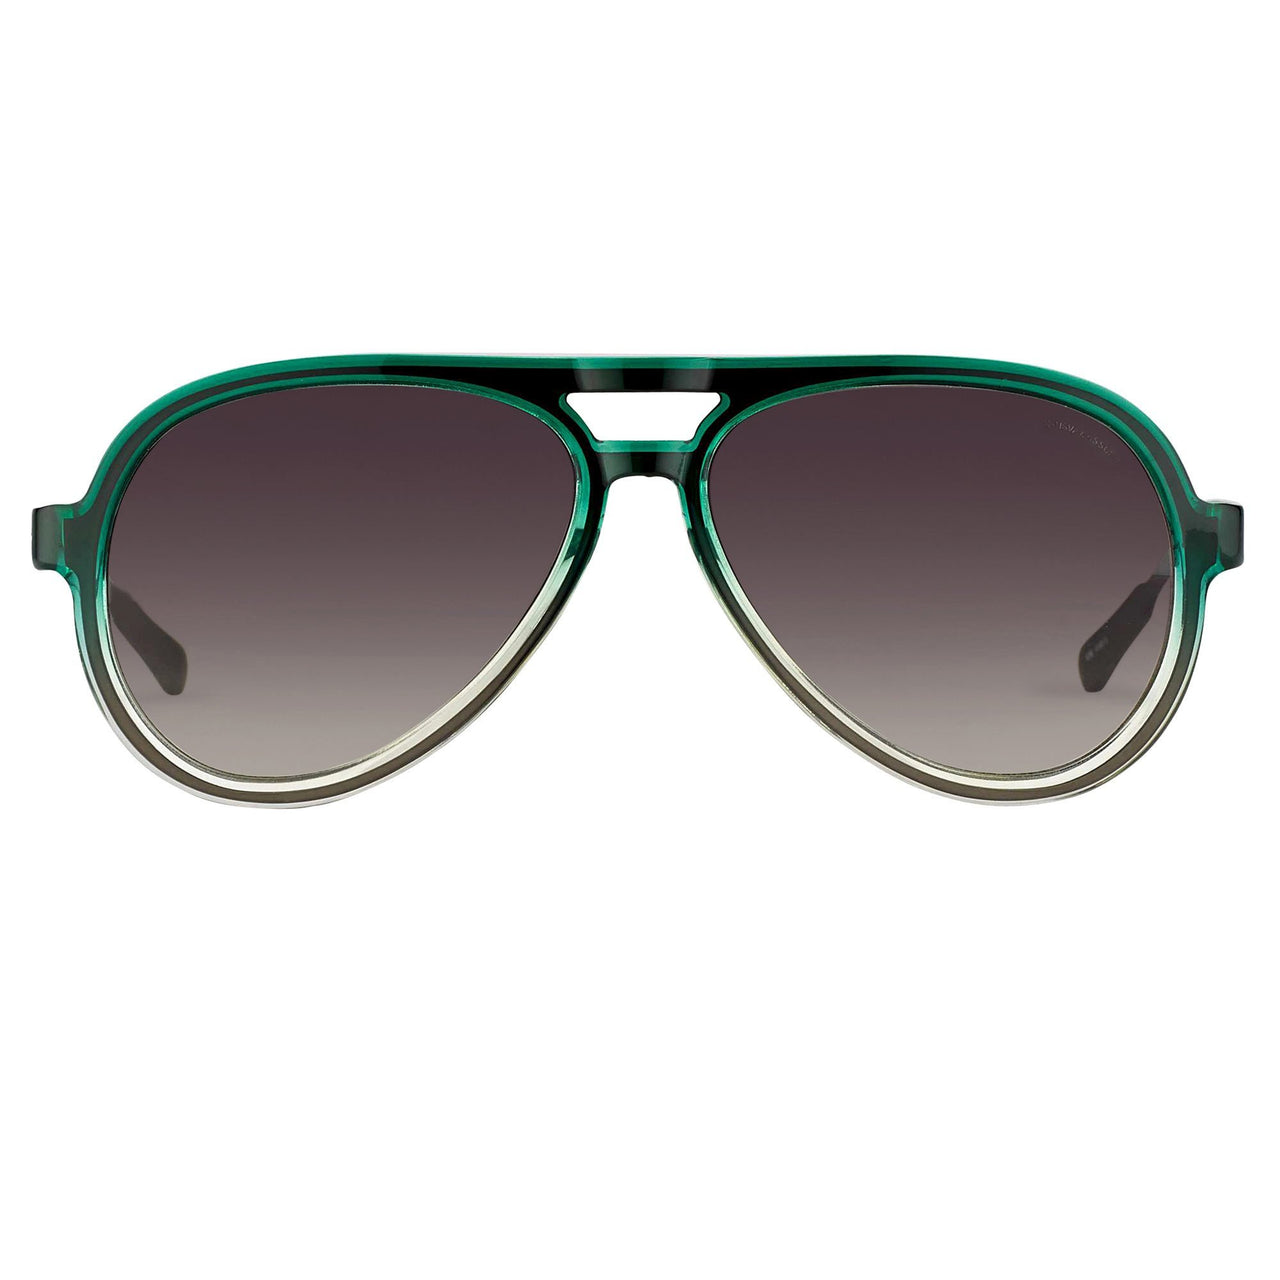 Kris Van Assche Unisex Sunglasses Clear Green and Brown Grey Graduated Lenses Category 2 - KVA78C3SUN - Watches & Crystals